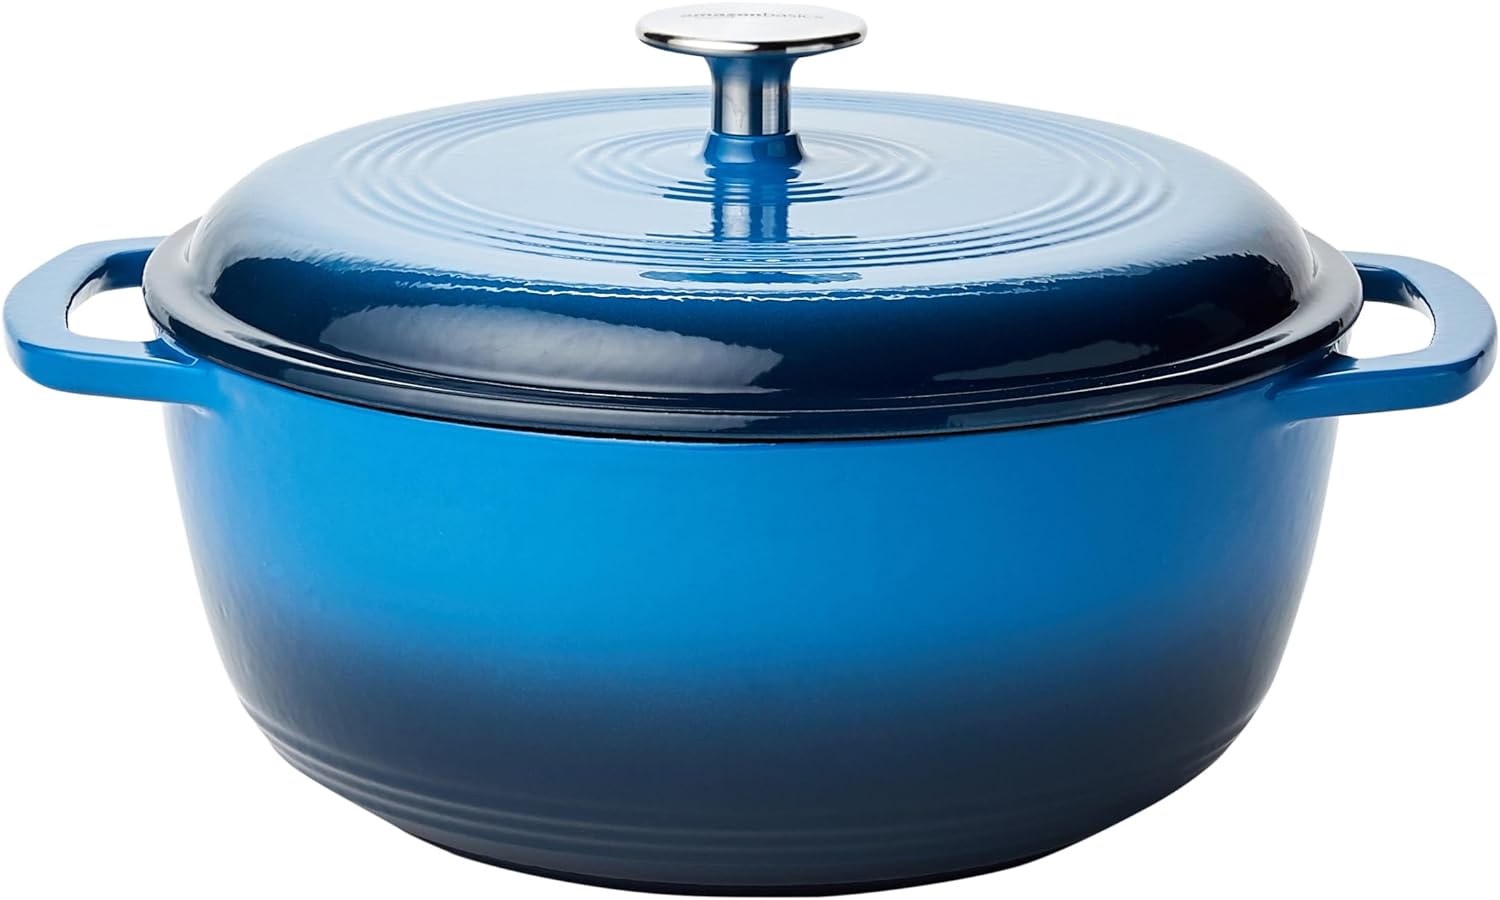 An Amazon Basics Enameled Cast Iron Covered Round Dutch Oven, 4.3-Quart in blue